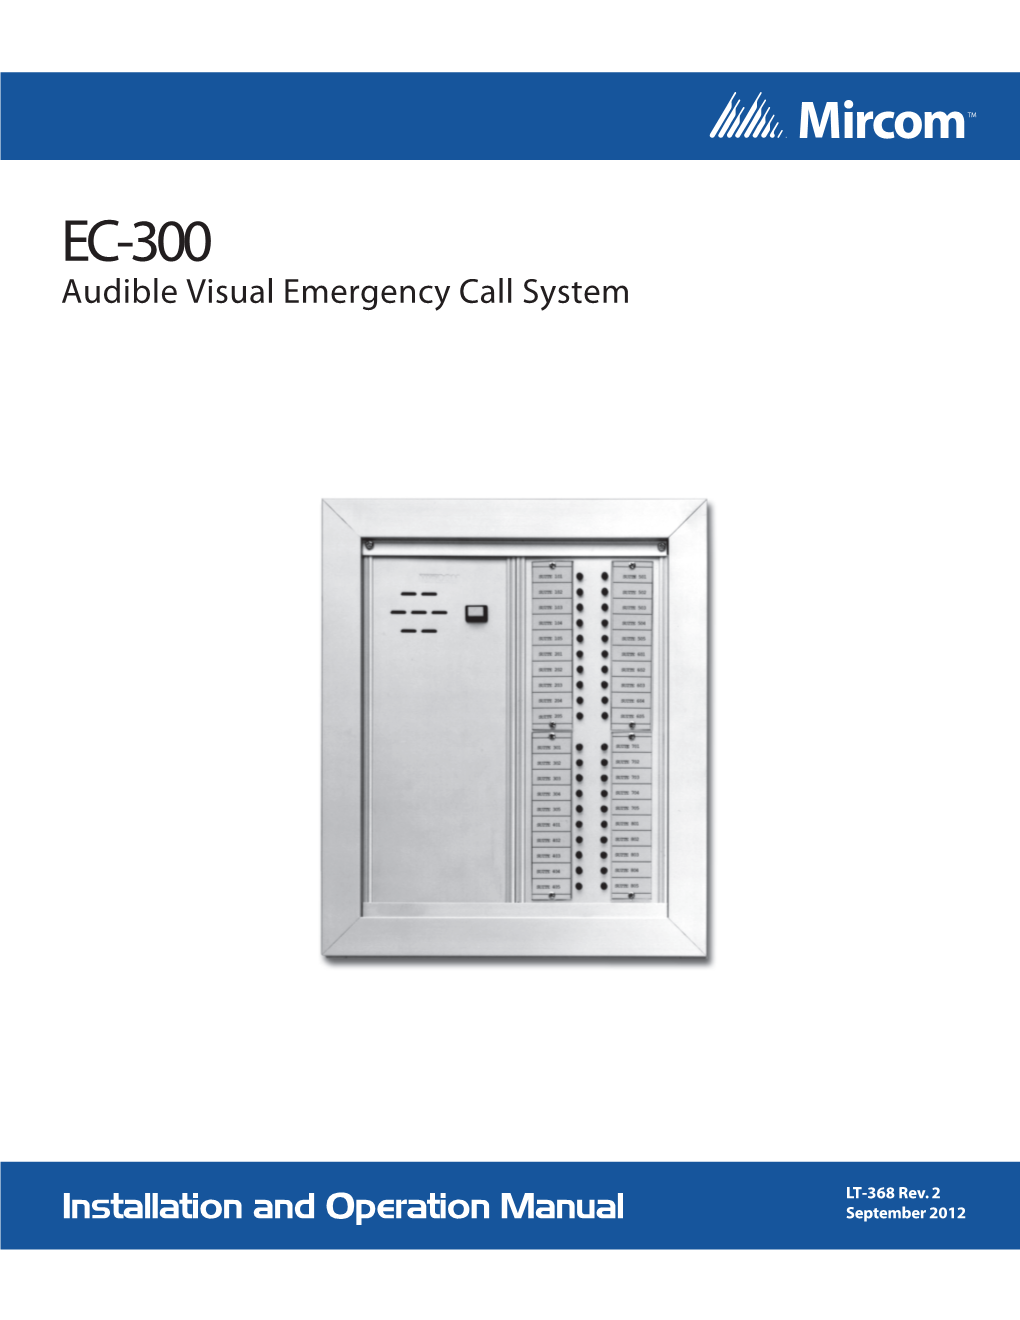 EC-300 Audible Visual Emergency Call System